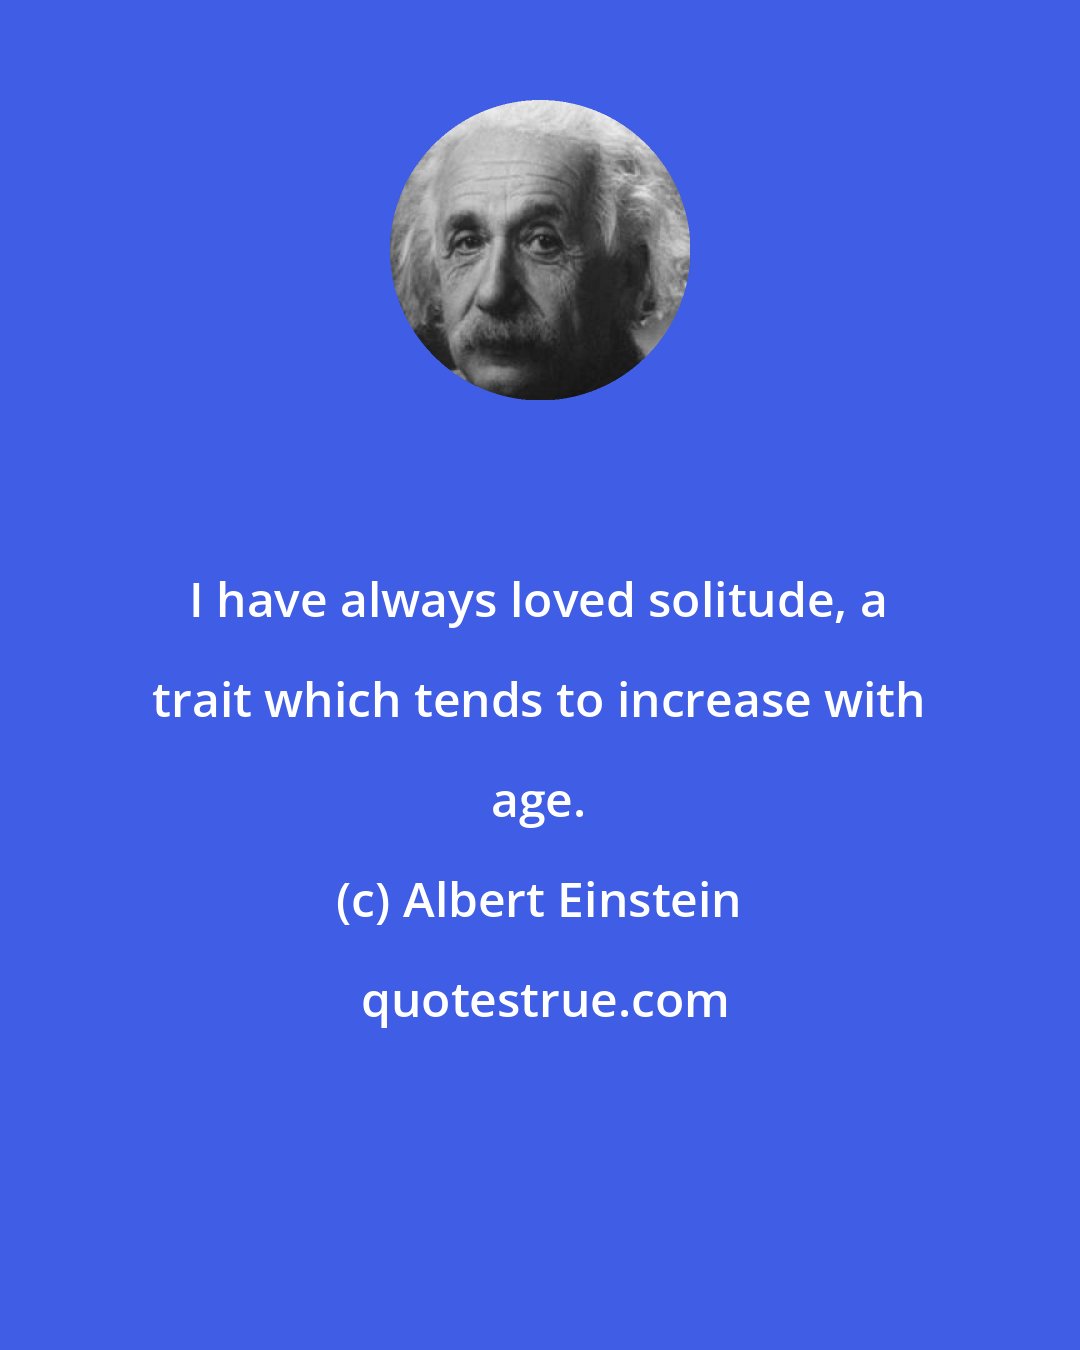 Albert Einstein: I have always loved solitude, a trait which tends to increase with age.